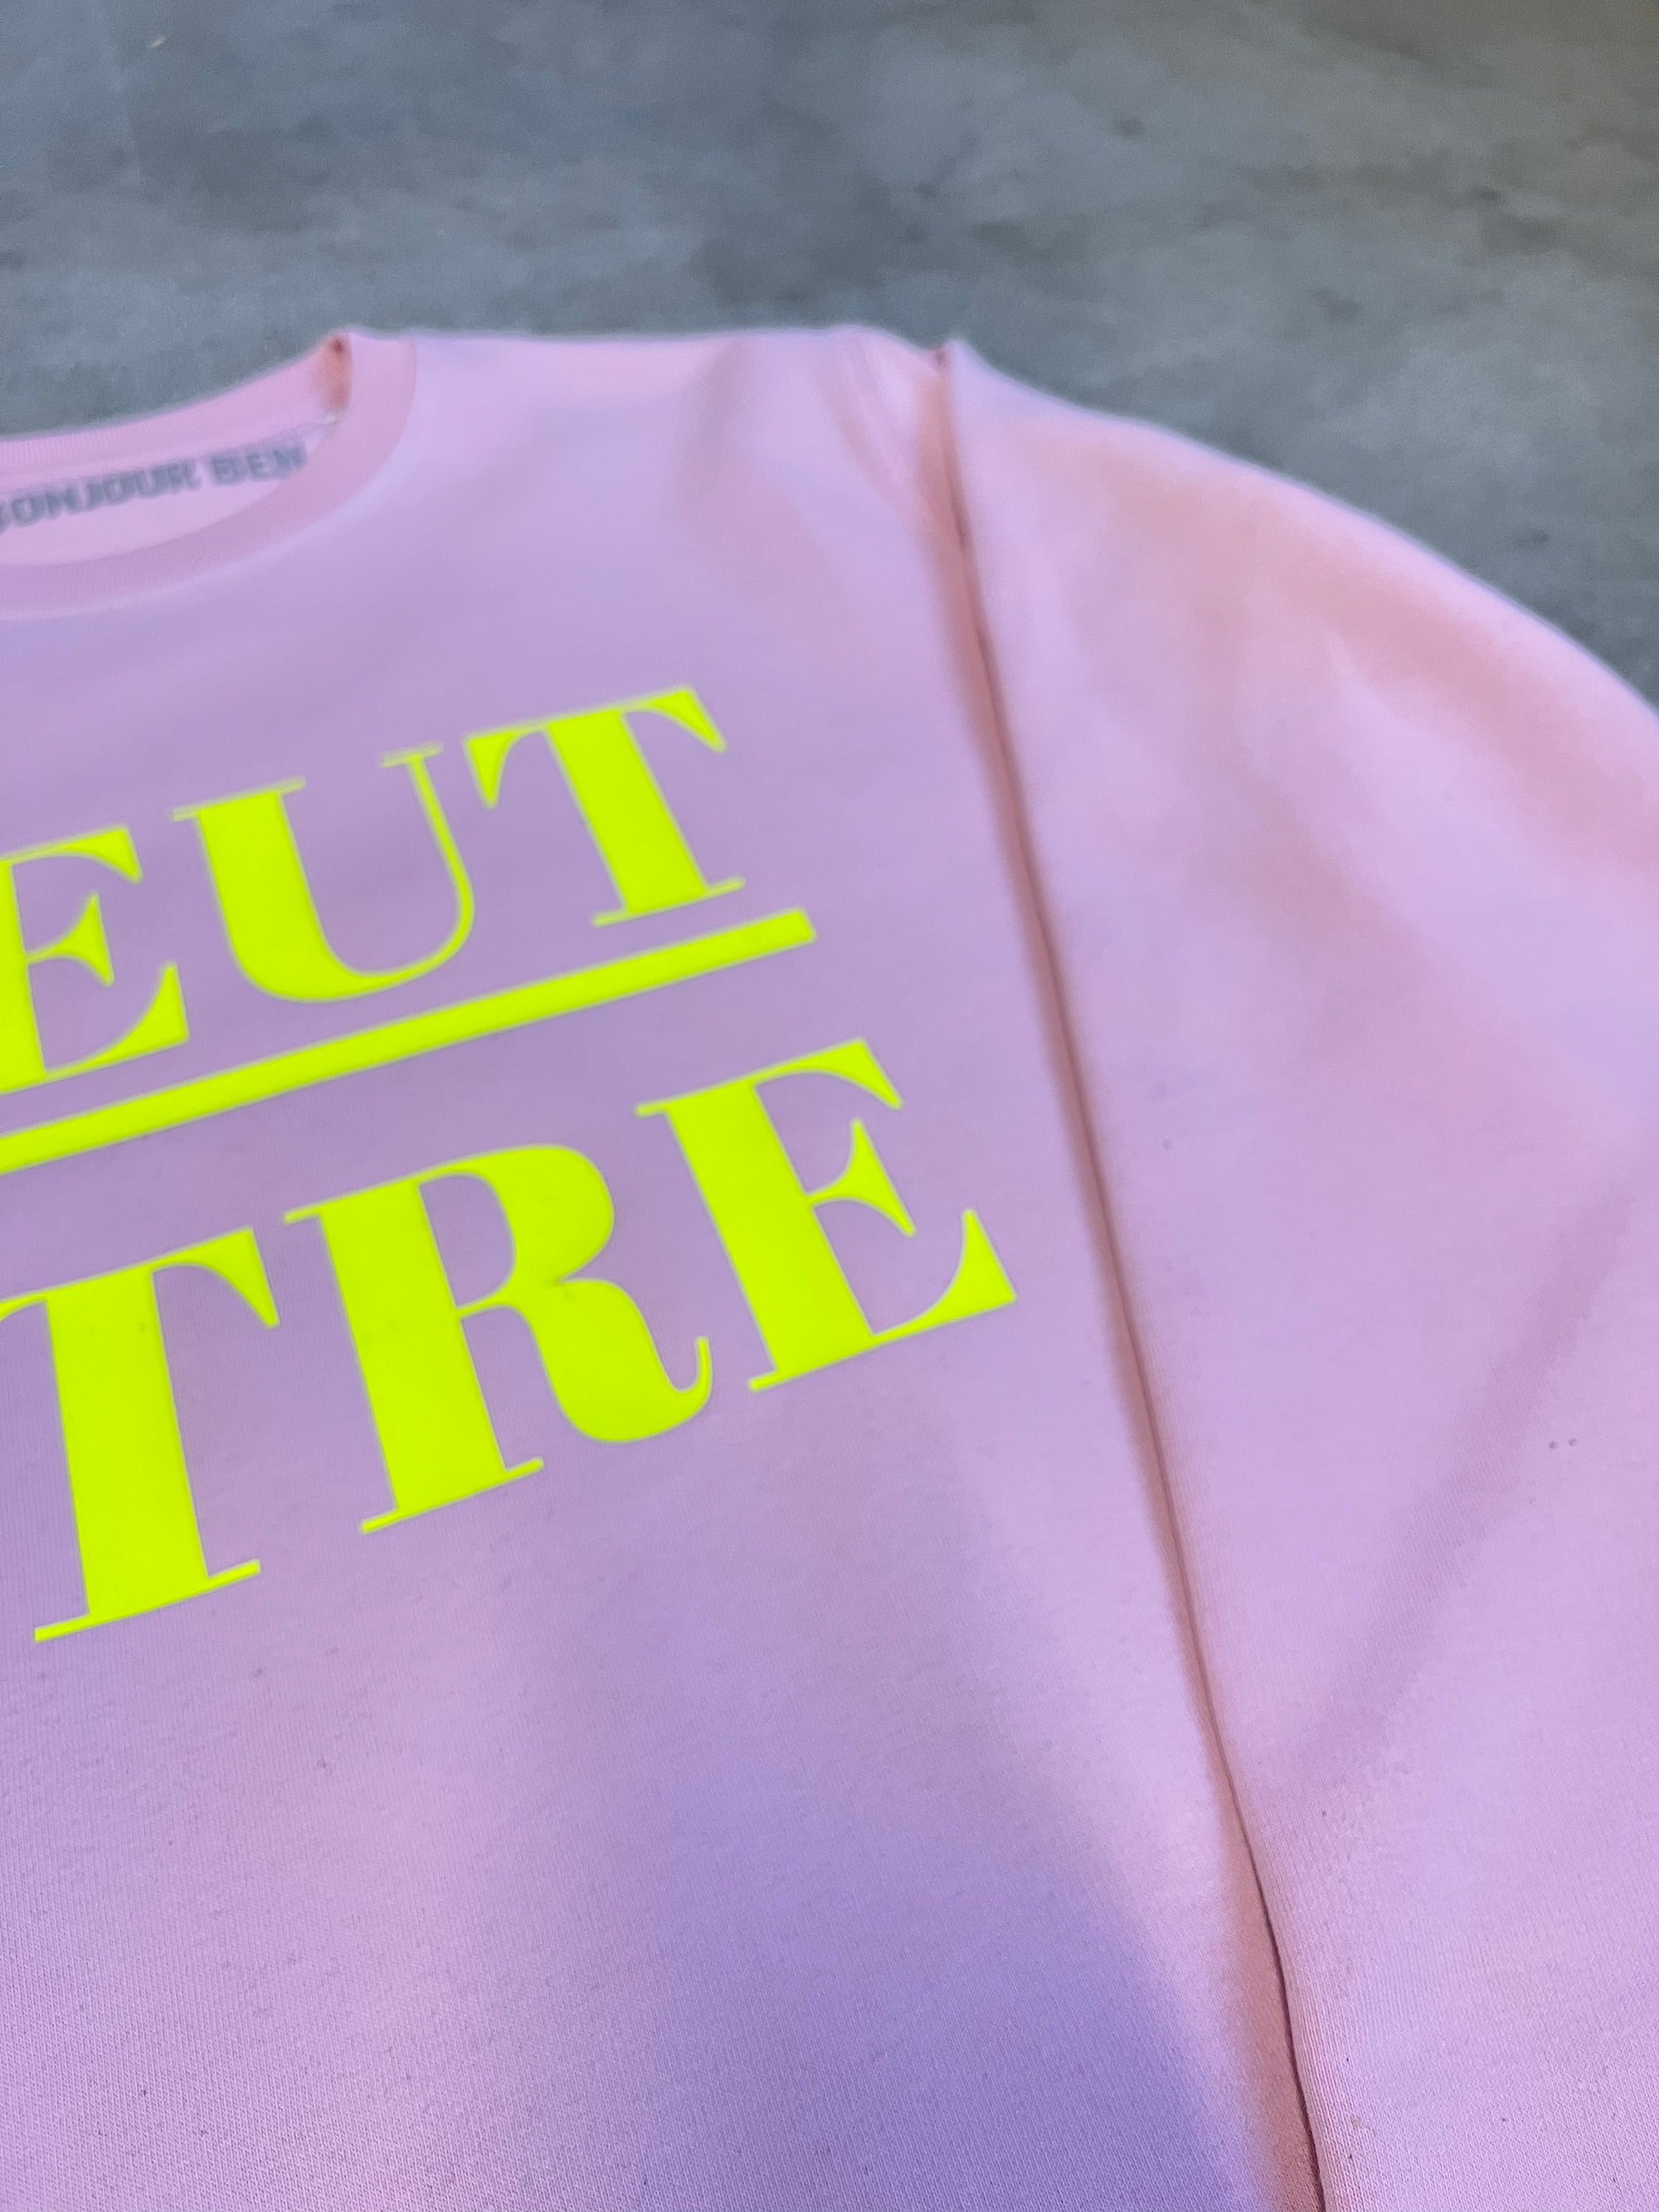 Peut-Être Sweater - Red/Neon Pink 